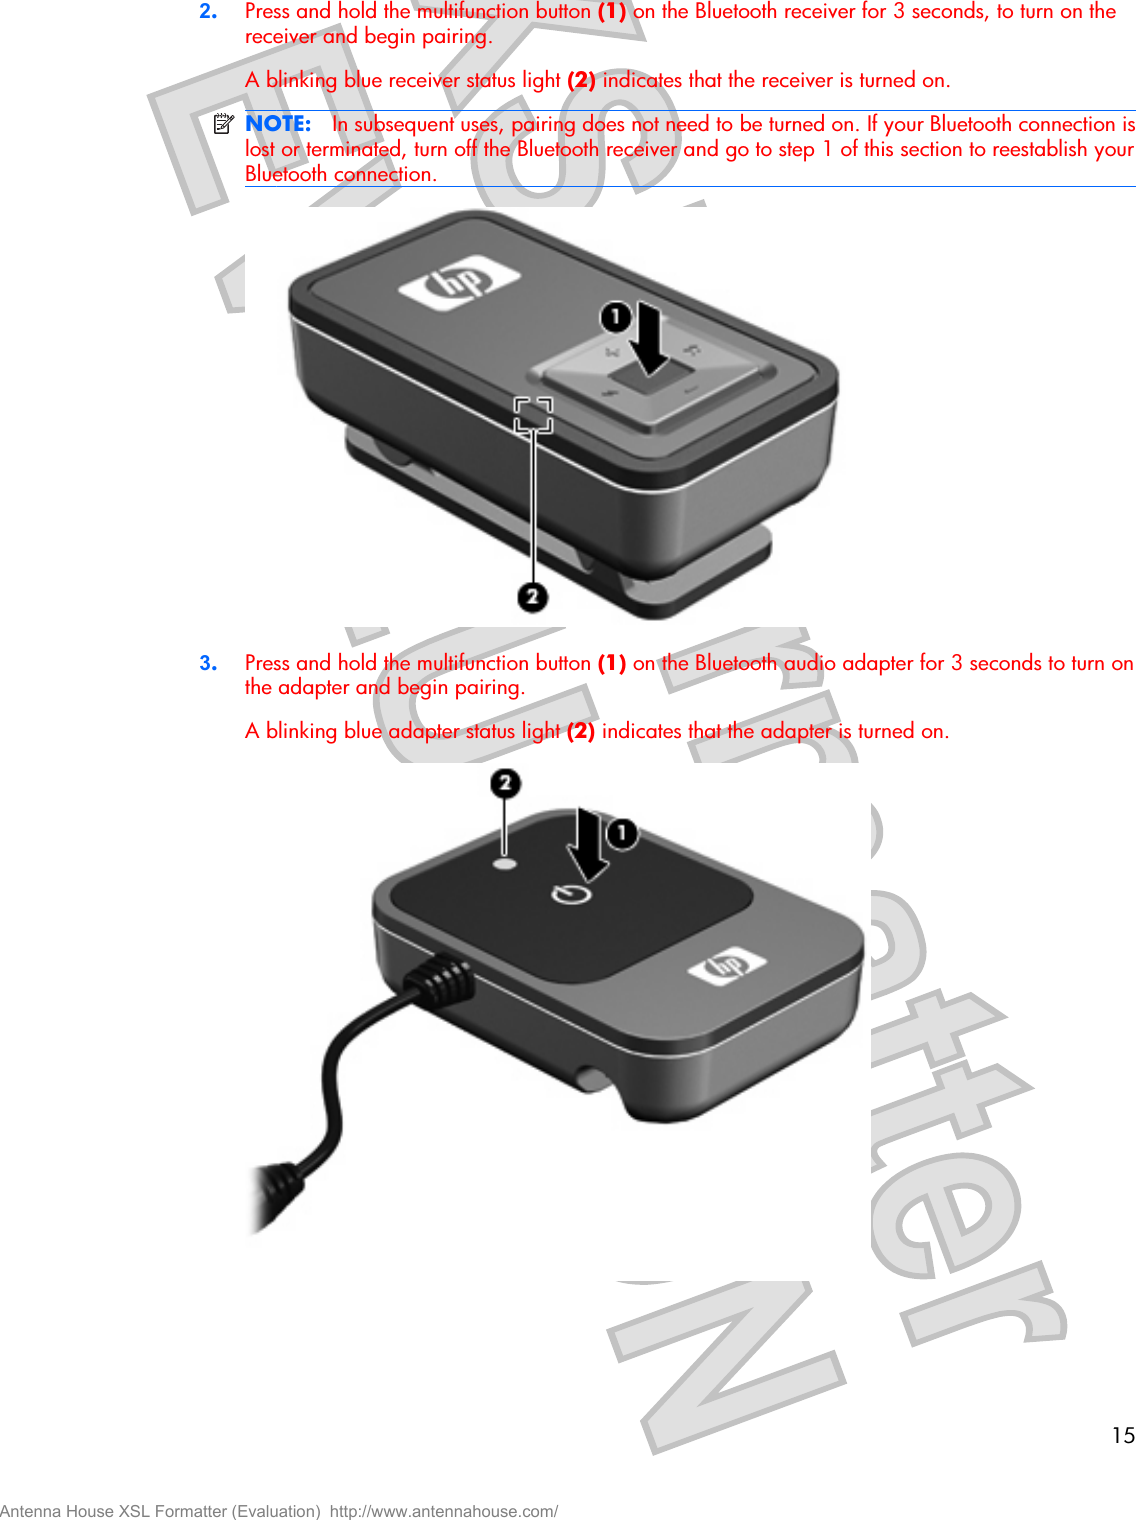 2.Press and hold the multifunction button (1) on the Bluetooth receiver for 3 seconds, to turn on thereceiver and begin pairing.A blinking blue receiver status light (2) indicates that the receiver is turned on.NOTE: In subsequent uses, pairing does not need to be turned on. If your Bluetooth connection islost or terminated, turn off the Bluetooth receiver and go to step 1 of this section to reestablish yourBluetooth connection.3.Press and hold the multifunction button (1) on the Bluetooth audio adapter for 3 seconds to turn onthe adapter and begin pairing.A blinking blue adapter status light (2) indicates that the adapter is turned on.15Antenna House XSL Formatter (Evaluation)  http://www.antennahouse.com/